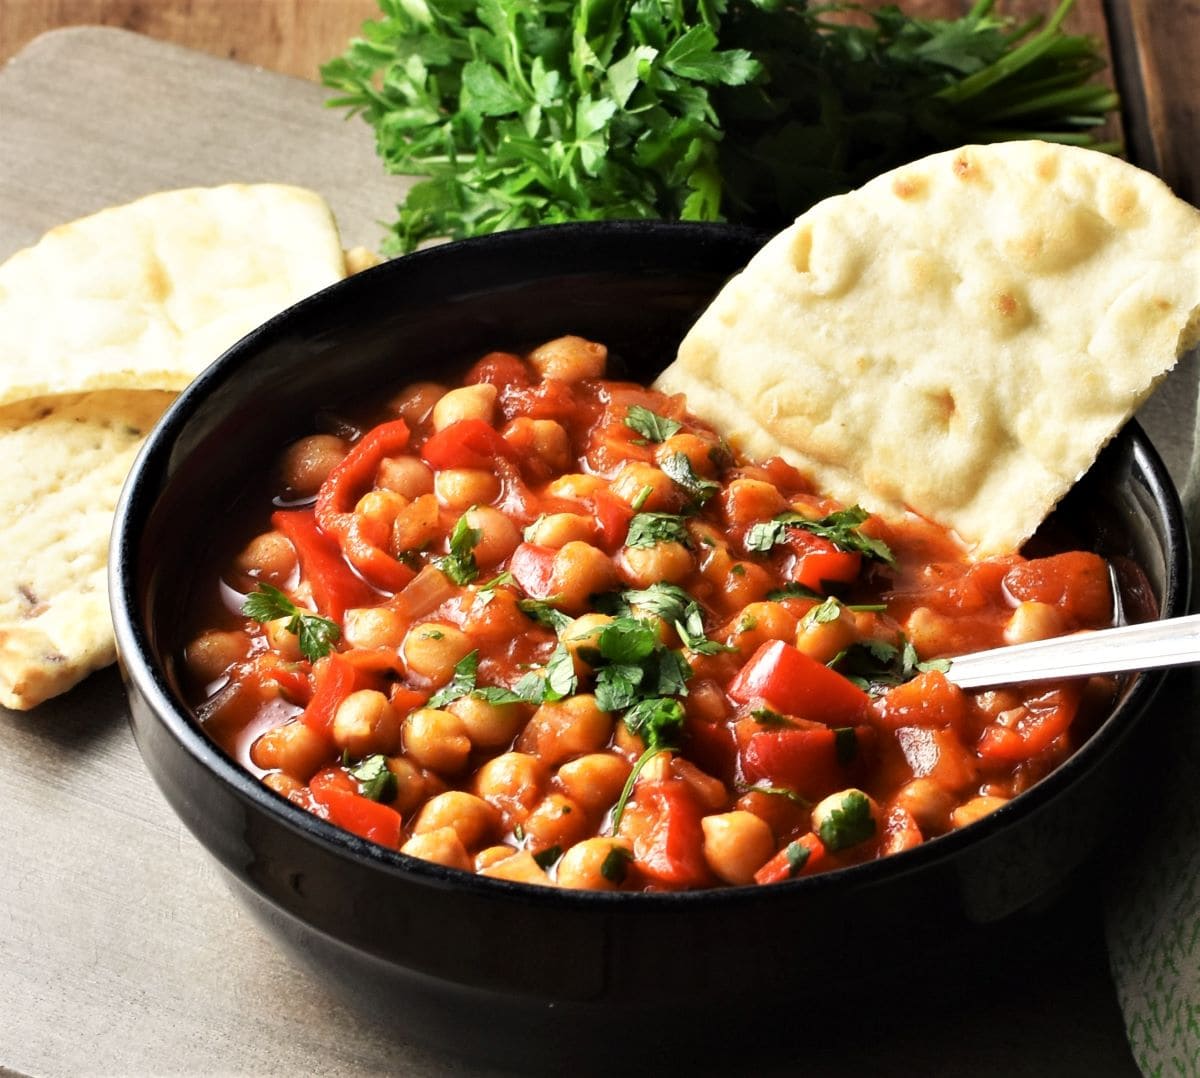 Side view of chickpea stew in black bowl with pita and parsley in background.